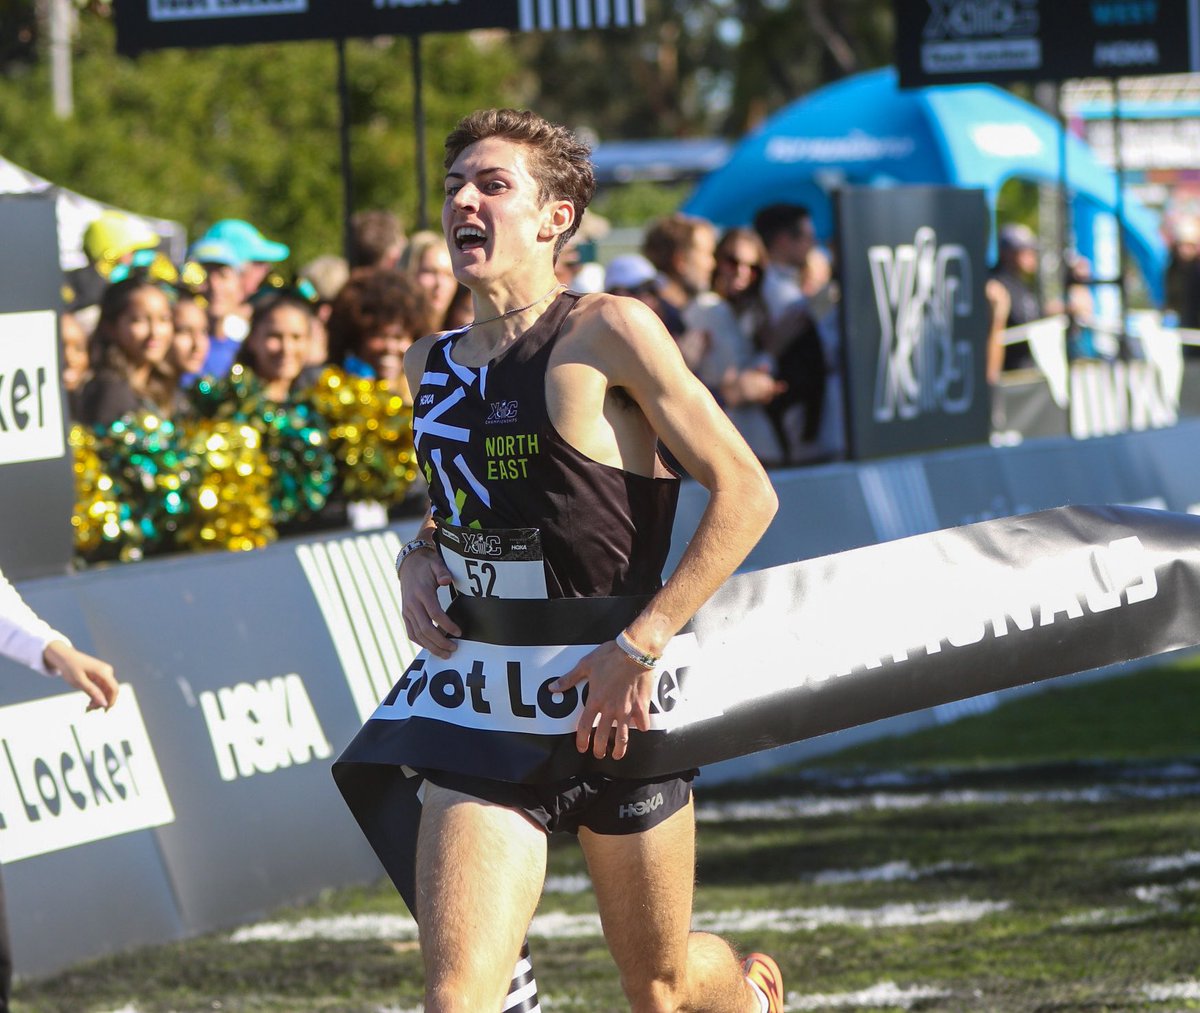 Drew Griffith of Butler HS (PA) wins the boys Footlocker Championship in 15:06.9